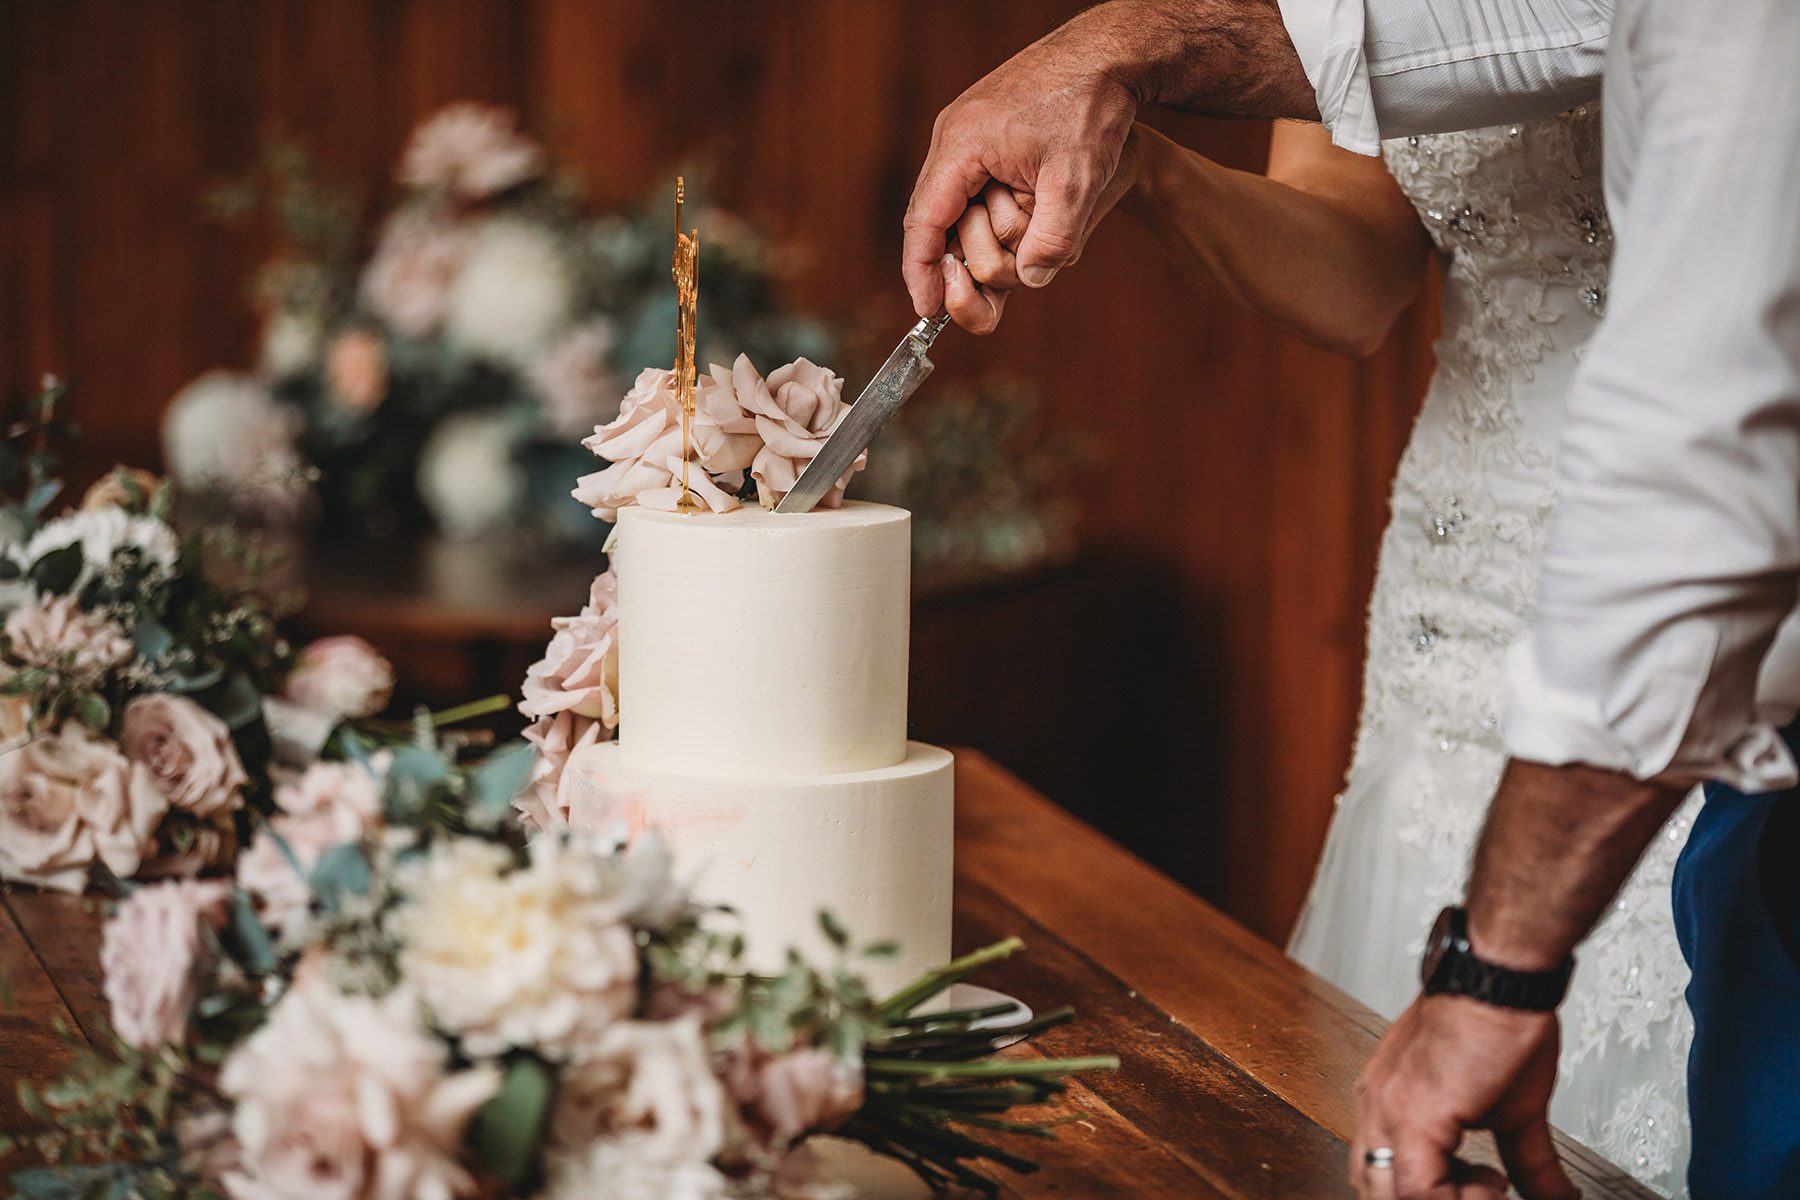 A couple hold hands as they cut into their wedding cake